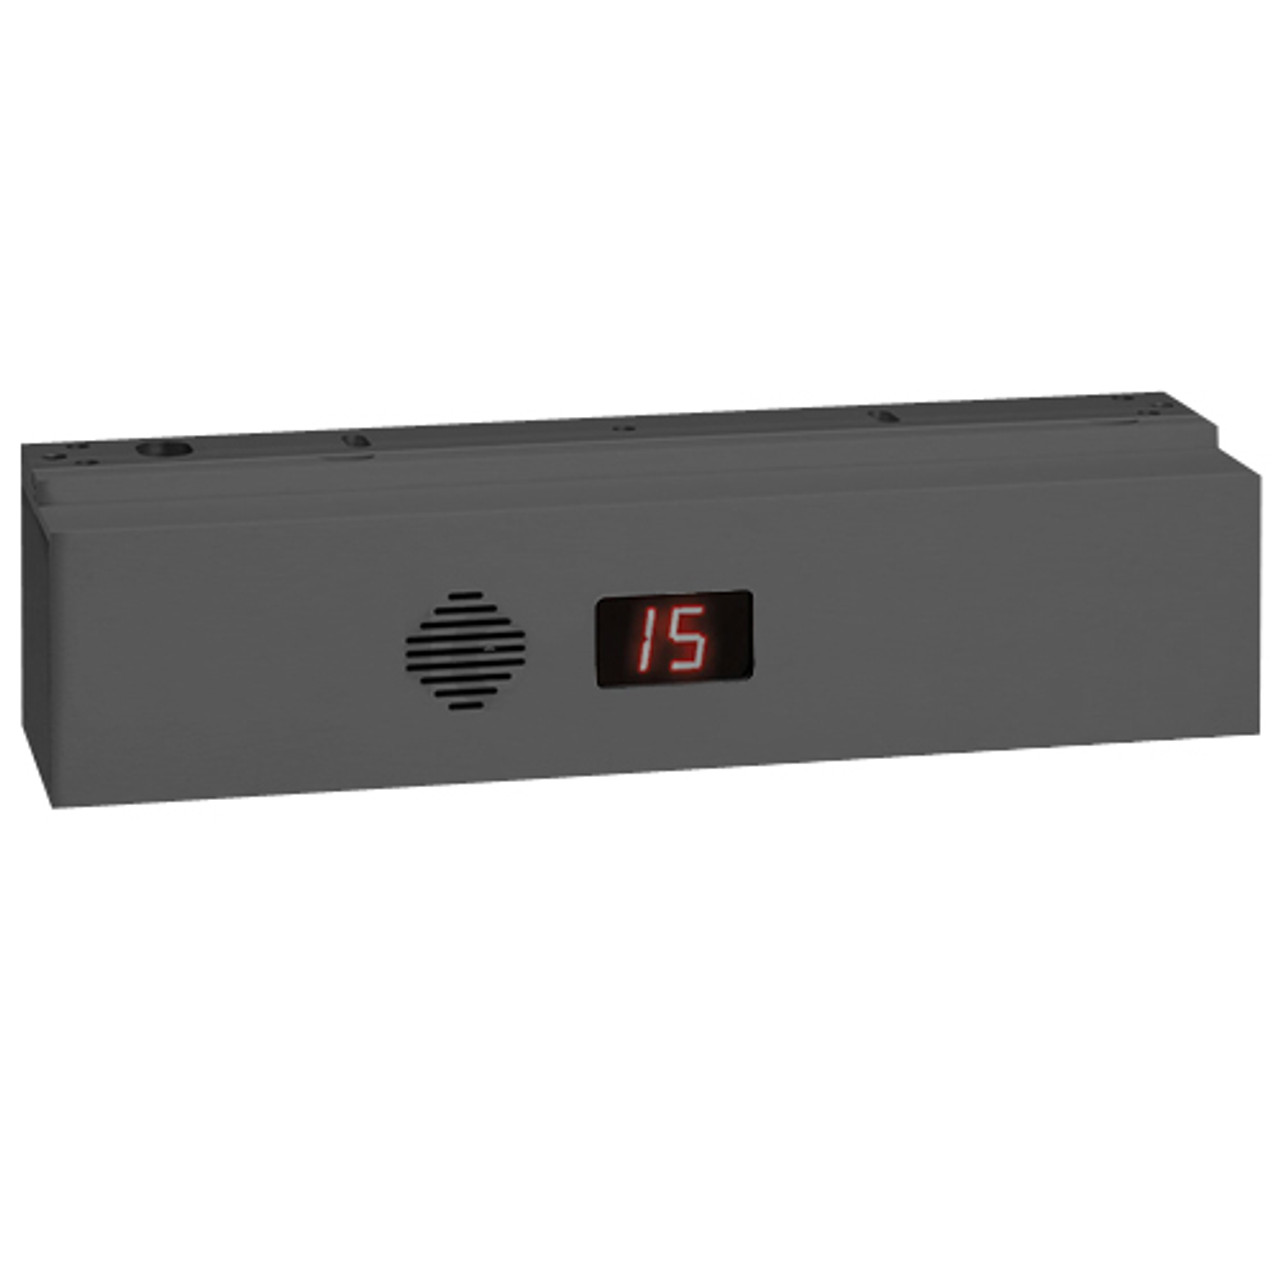 1511S-NC-L-Y-DBA SDC 1511S Series Single Integrated Delayed Egress Locks with Door Position Status and Magnetic Bond Sensor in Black Anodized